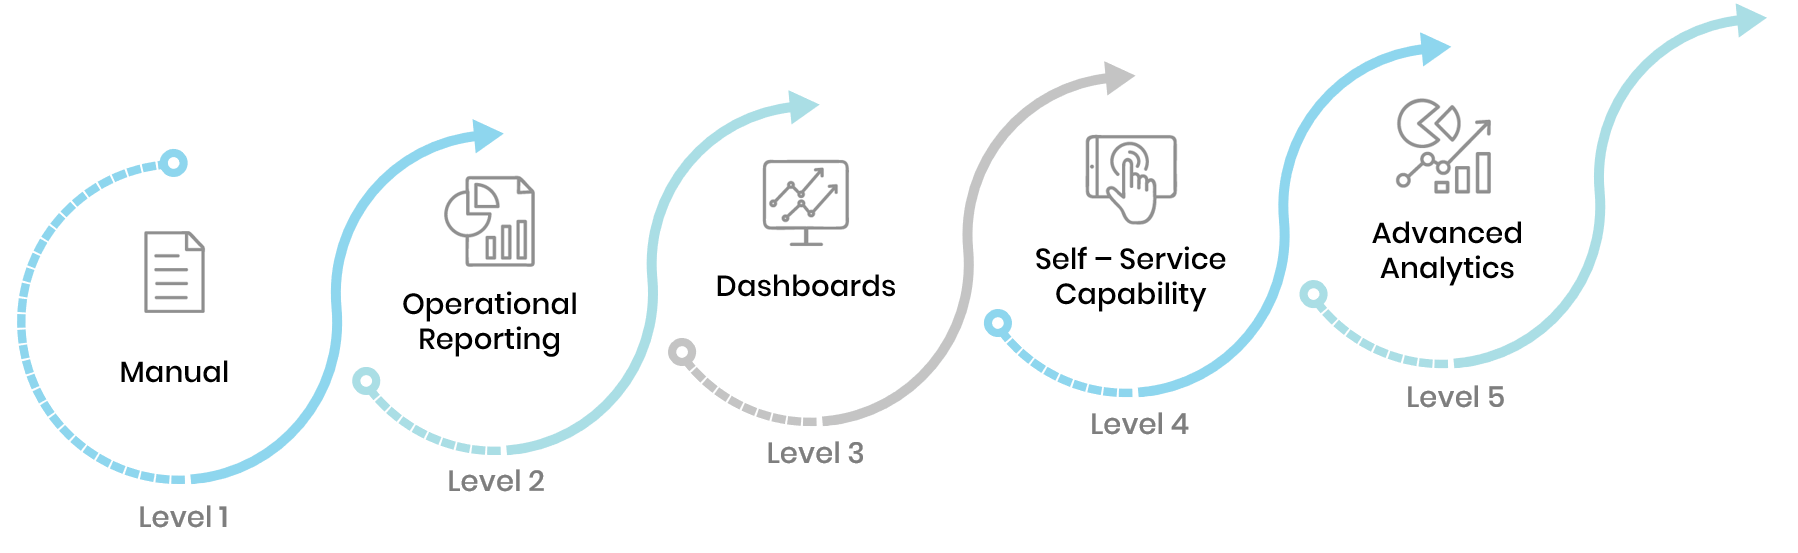 a graphic depicting trianz step up methodology for business intelligence that results in advanced analytics